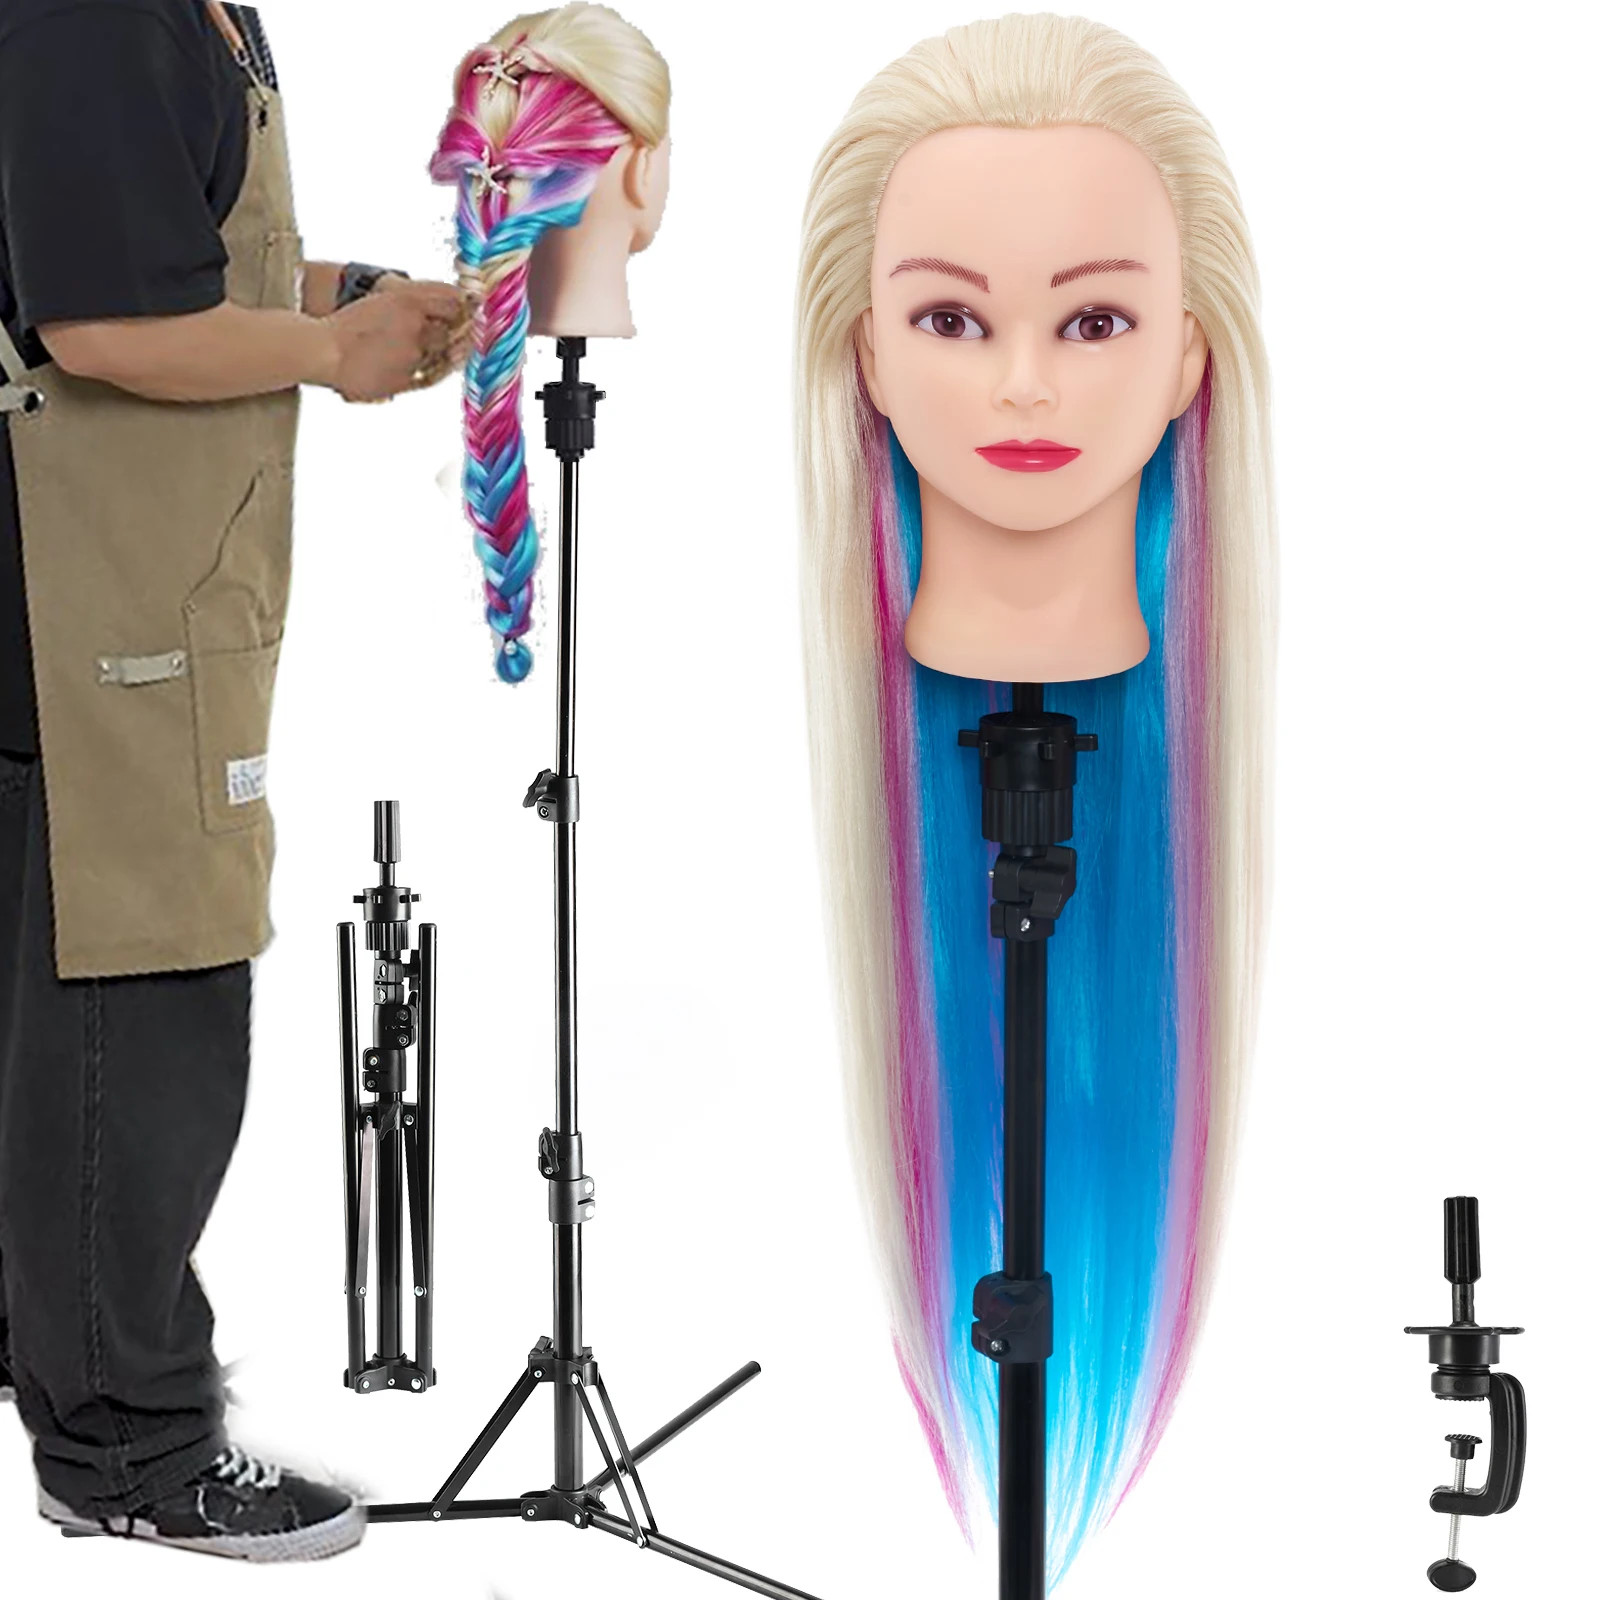 71cm-long-thick-hair-salon-mannequin-head-practice-doll-head-hairstyles-hairdressing-training-120cm-tripod